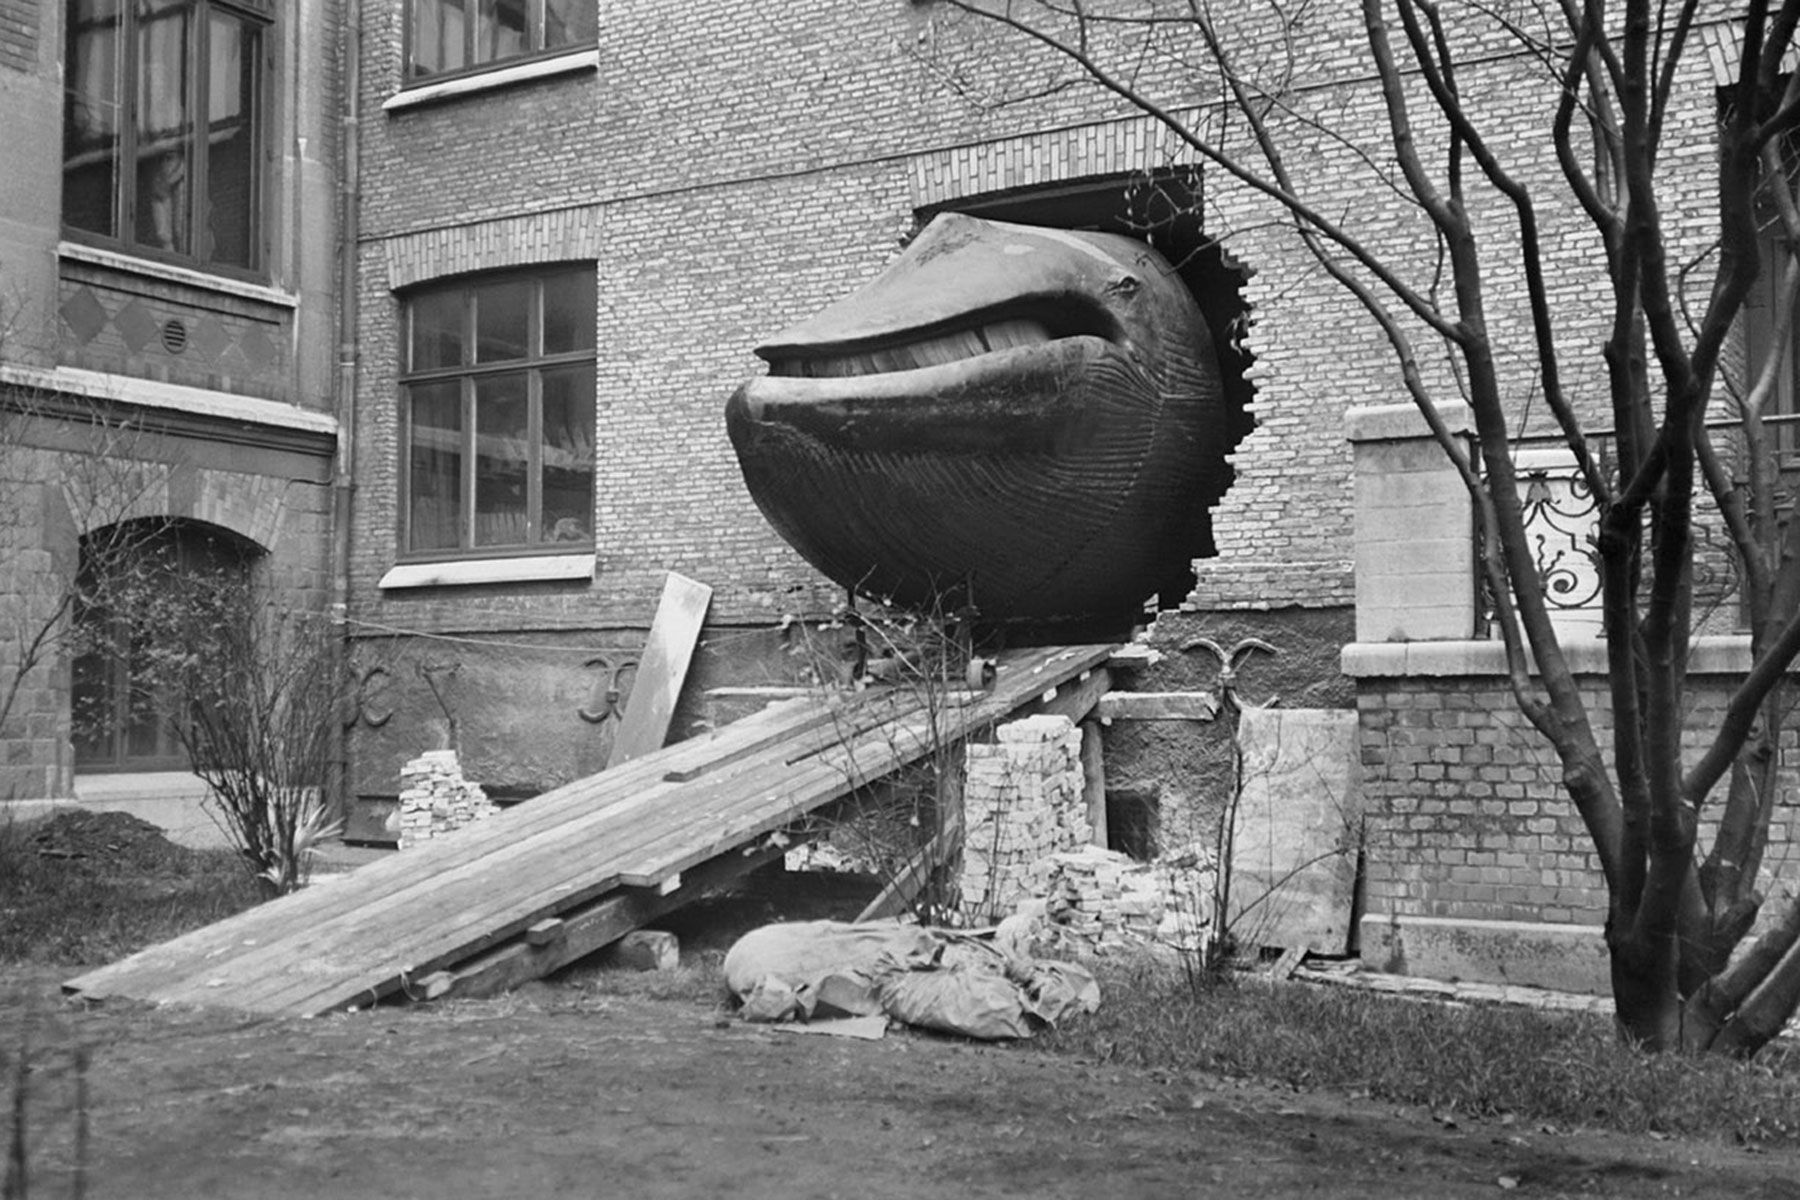 A 1918 photograph of the Malm Whale being moved from the Ostindiska Huset to its newly built premises at the Naturhistoriska Museet in Slottsskogen in Sweden.